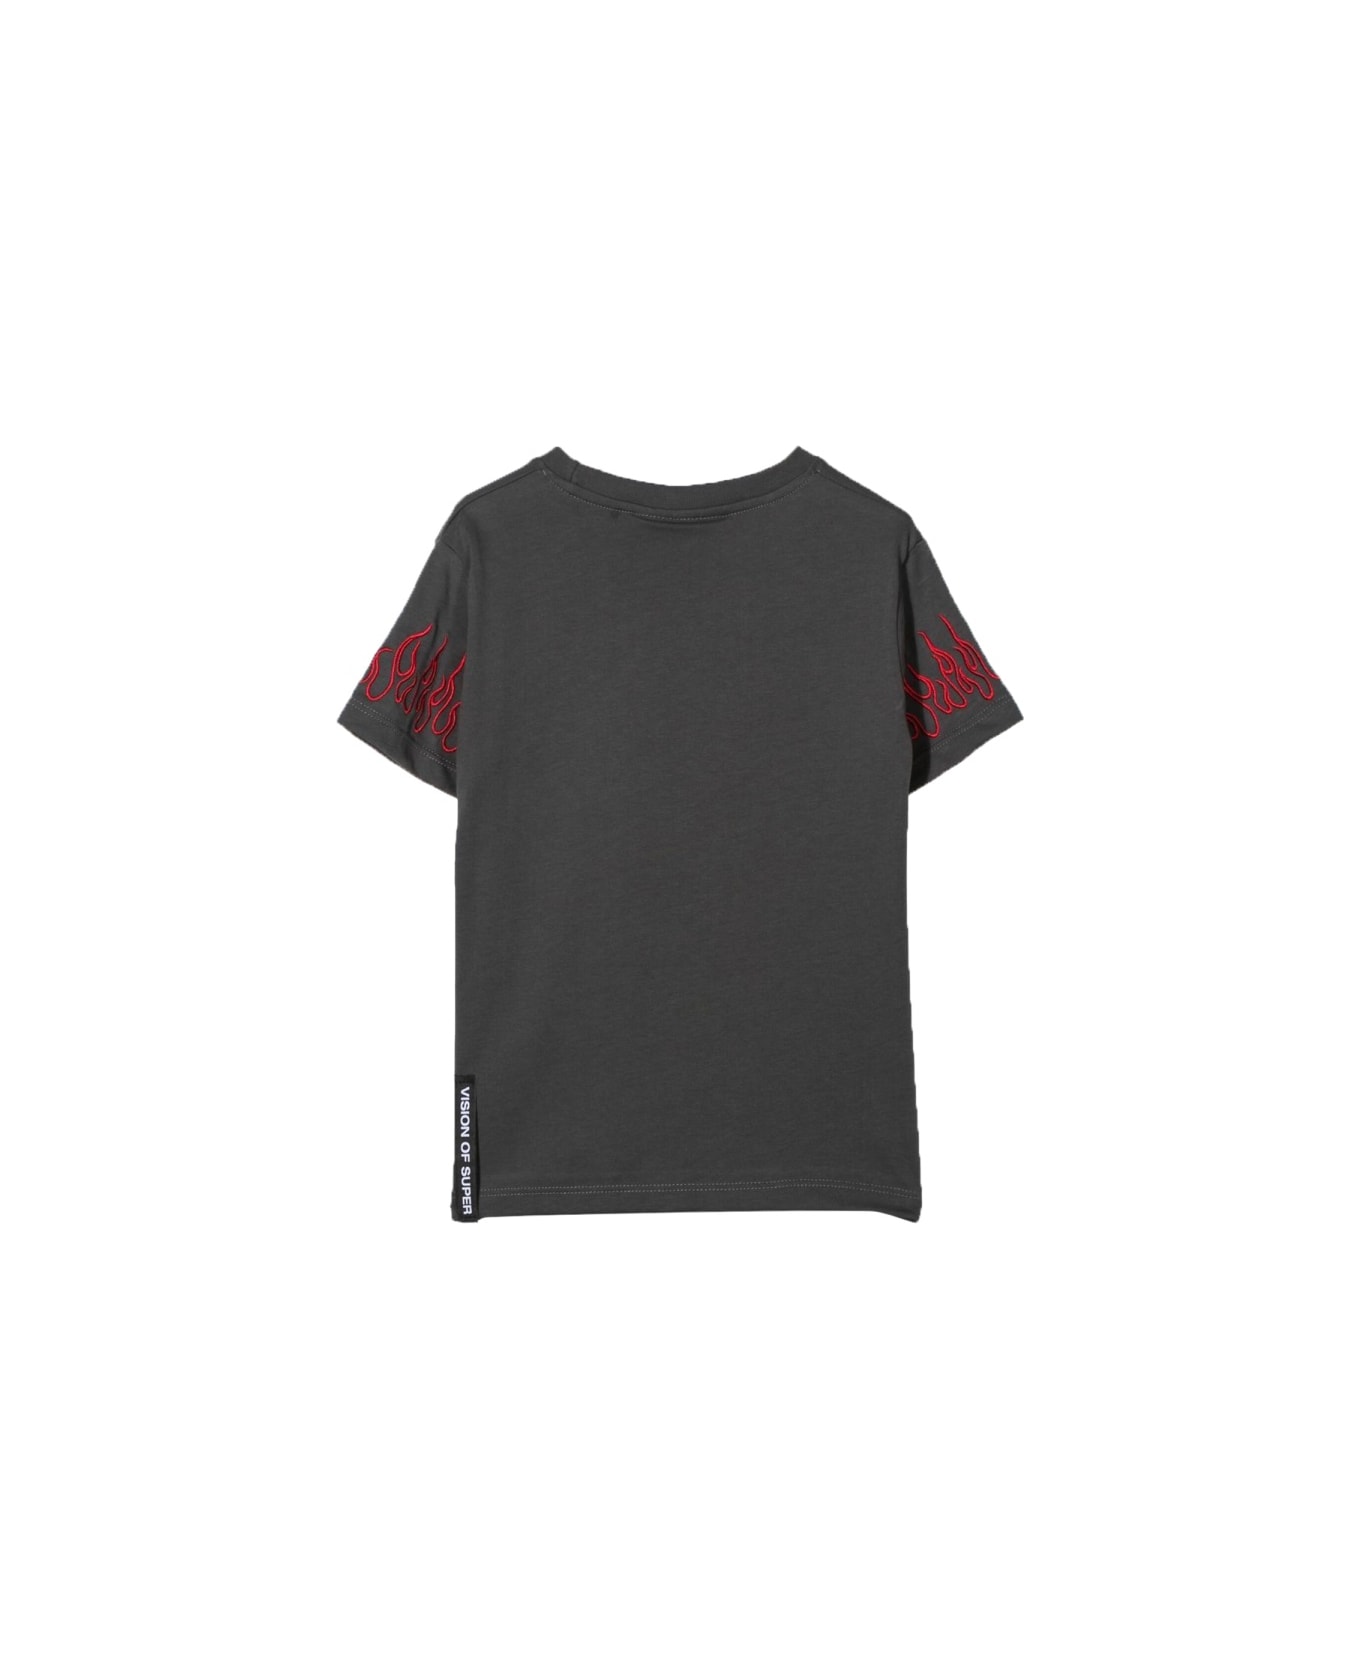 Vision of Super M/c Embroidery Red Flames - CHARCOAL